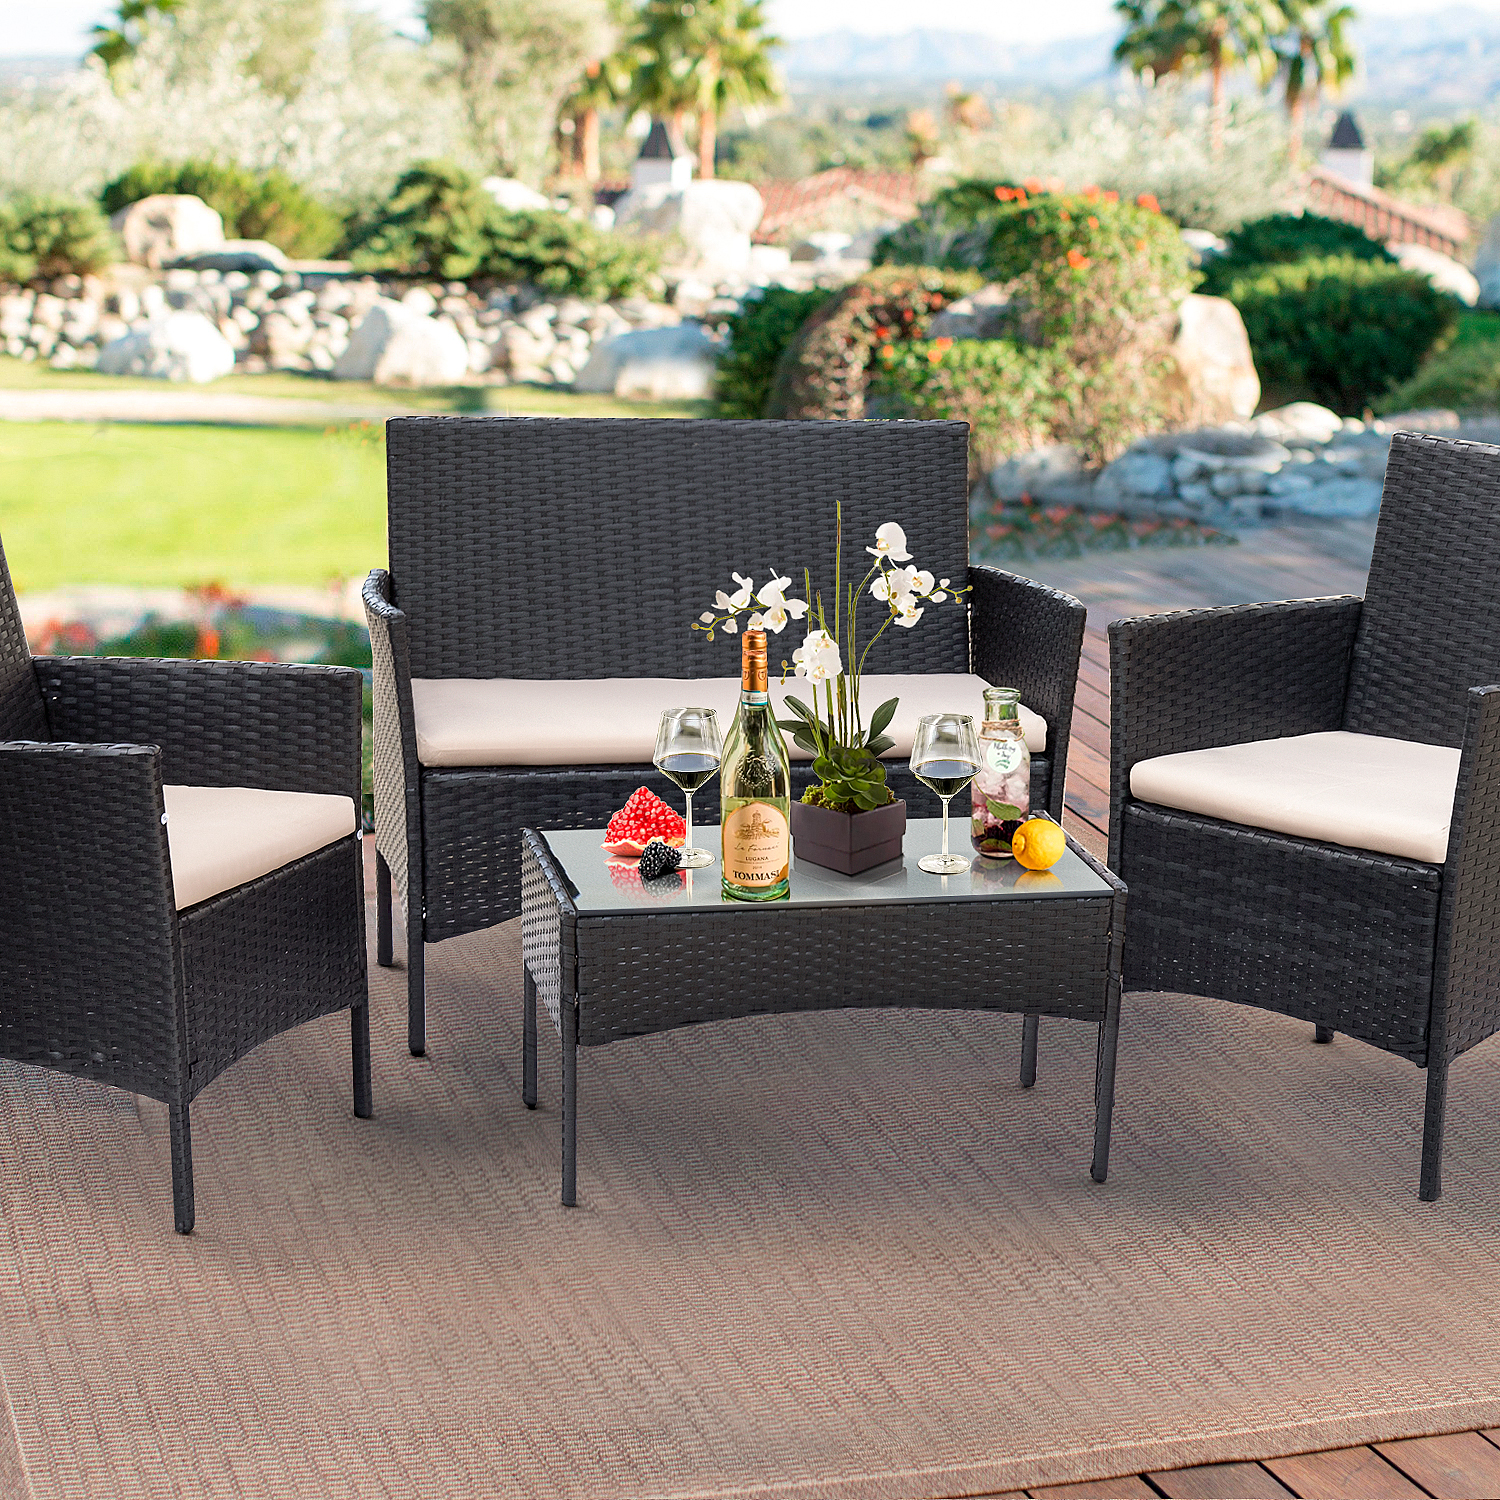 Lacoo 4 Piece Outdoor Patio Furniture PE Rattan Wicker Table and Chairs Set, Beige - image 5 of 7